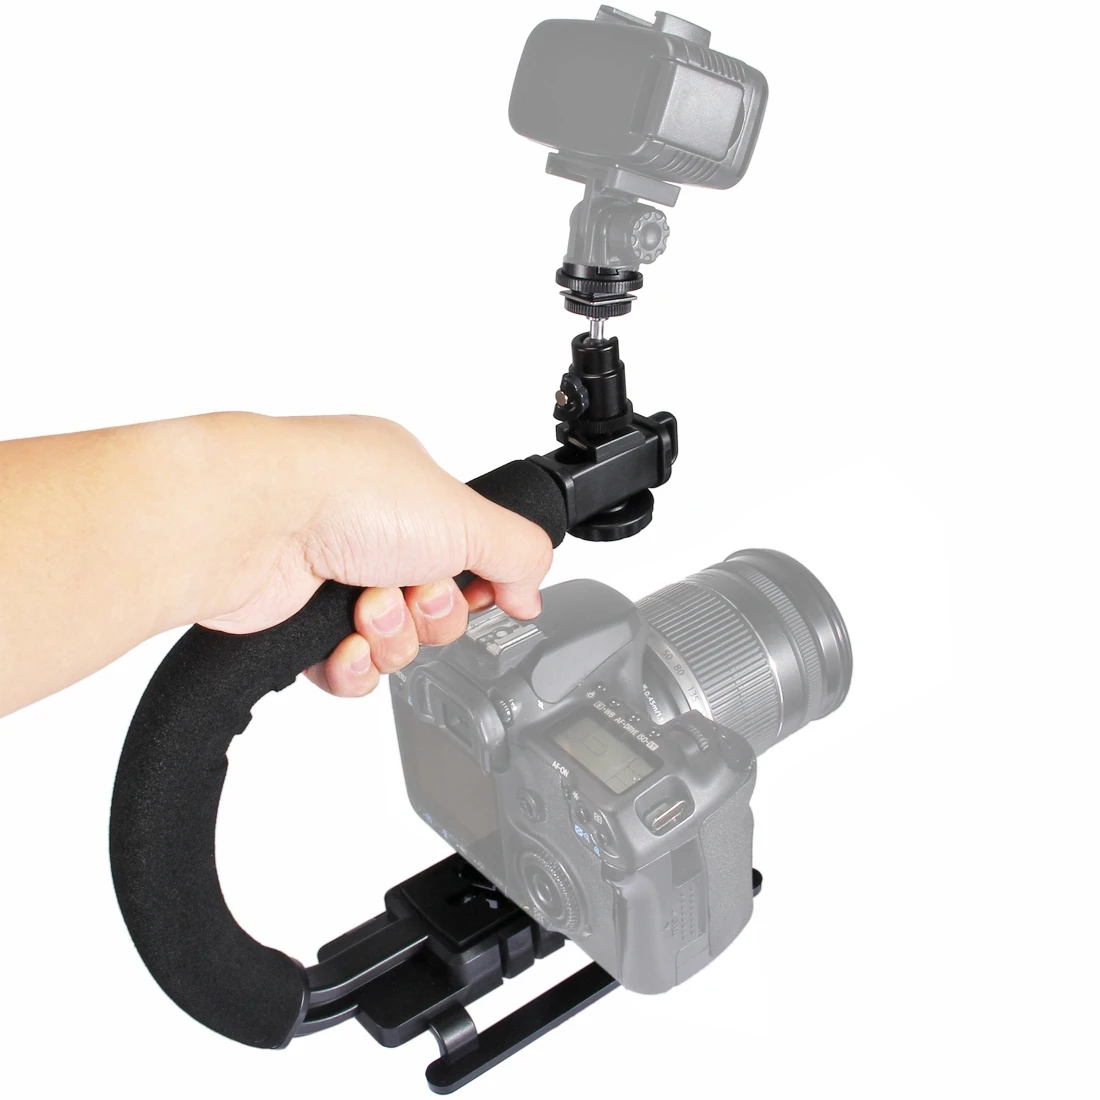 

Factory directly sell PULUZ U/C Shape Portable Handheld DV Bracket Stabilizer Kit for All SLR Cameras and Home DV Camera